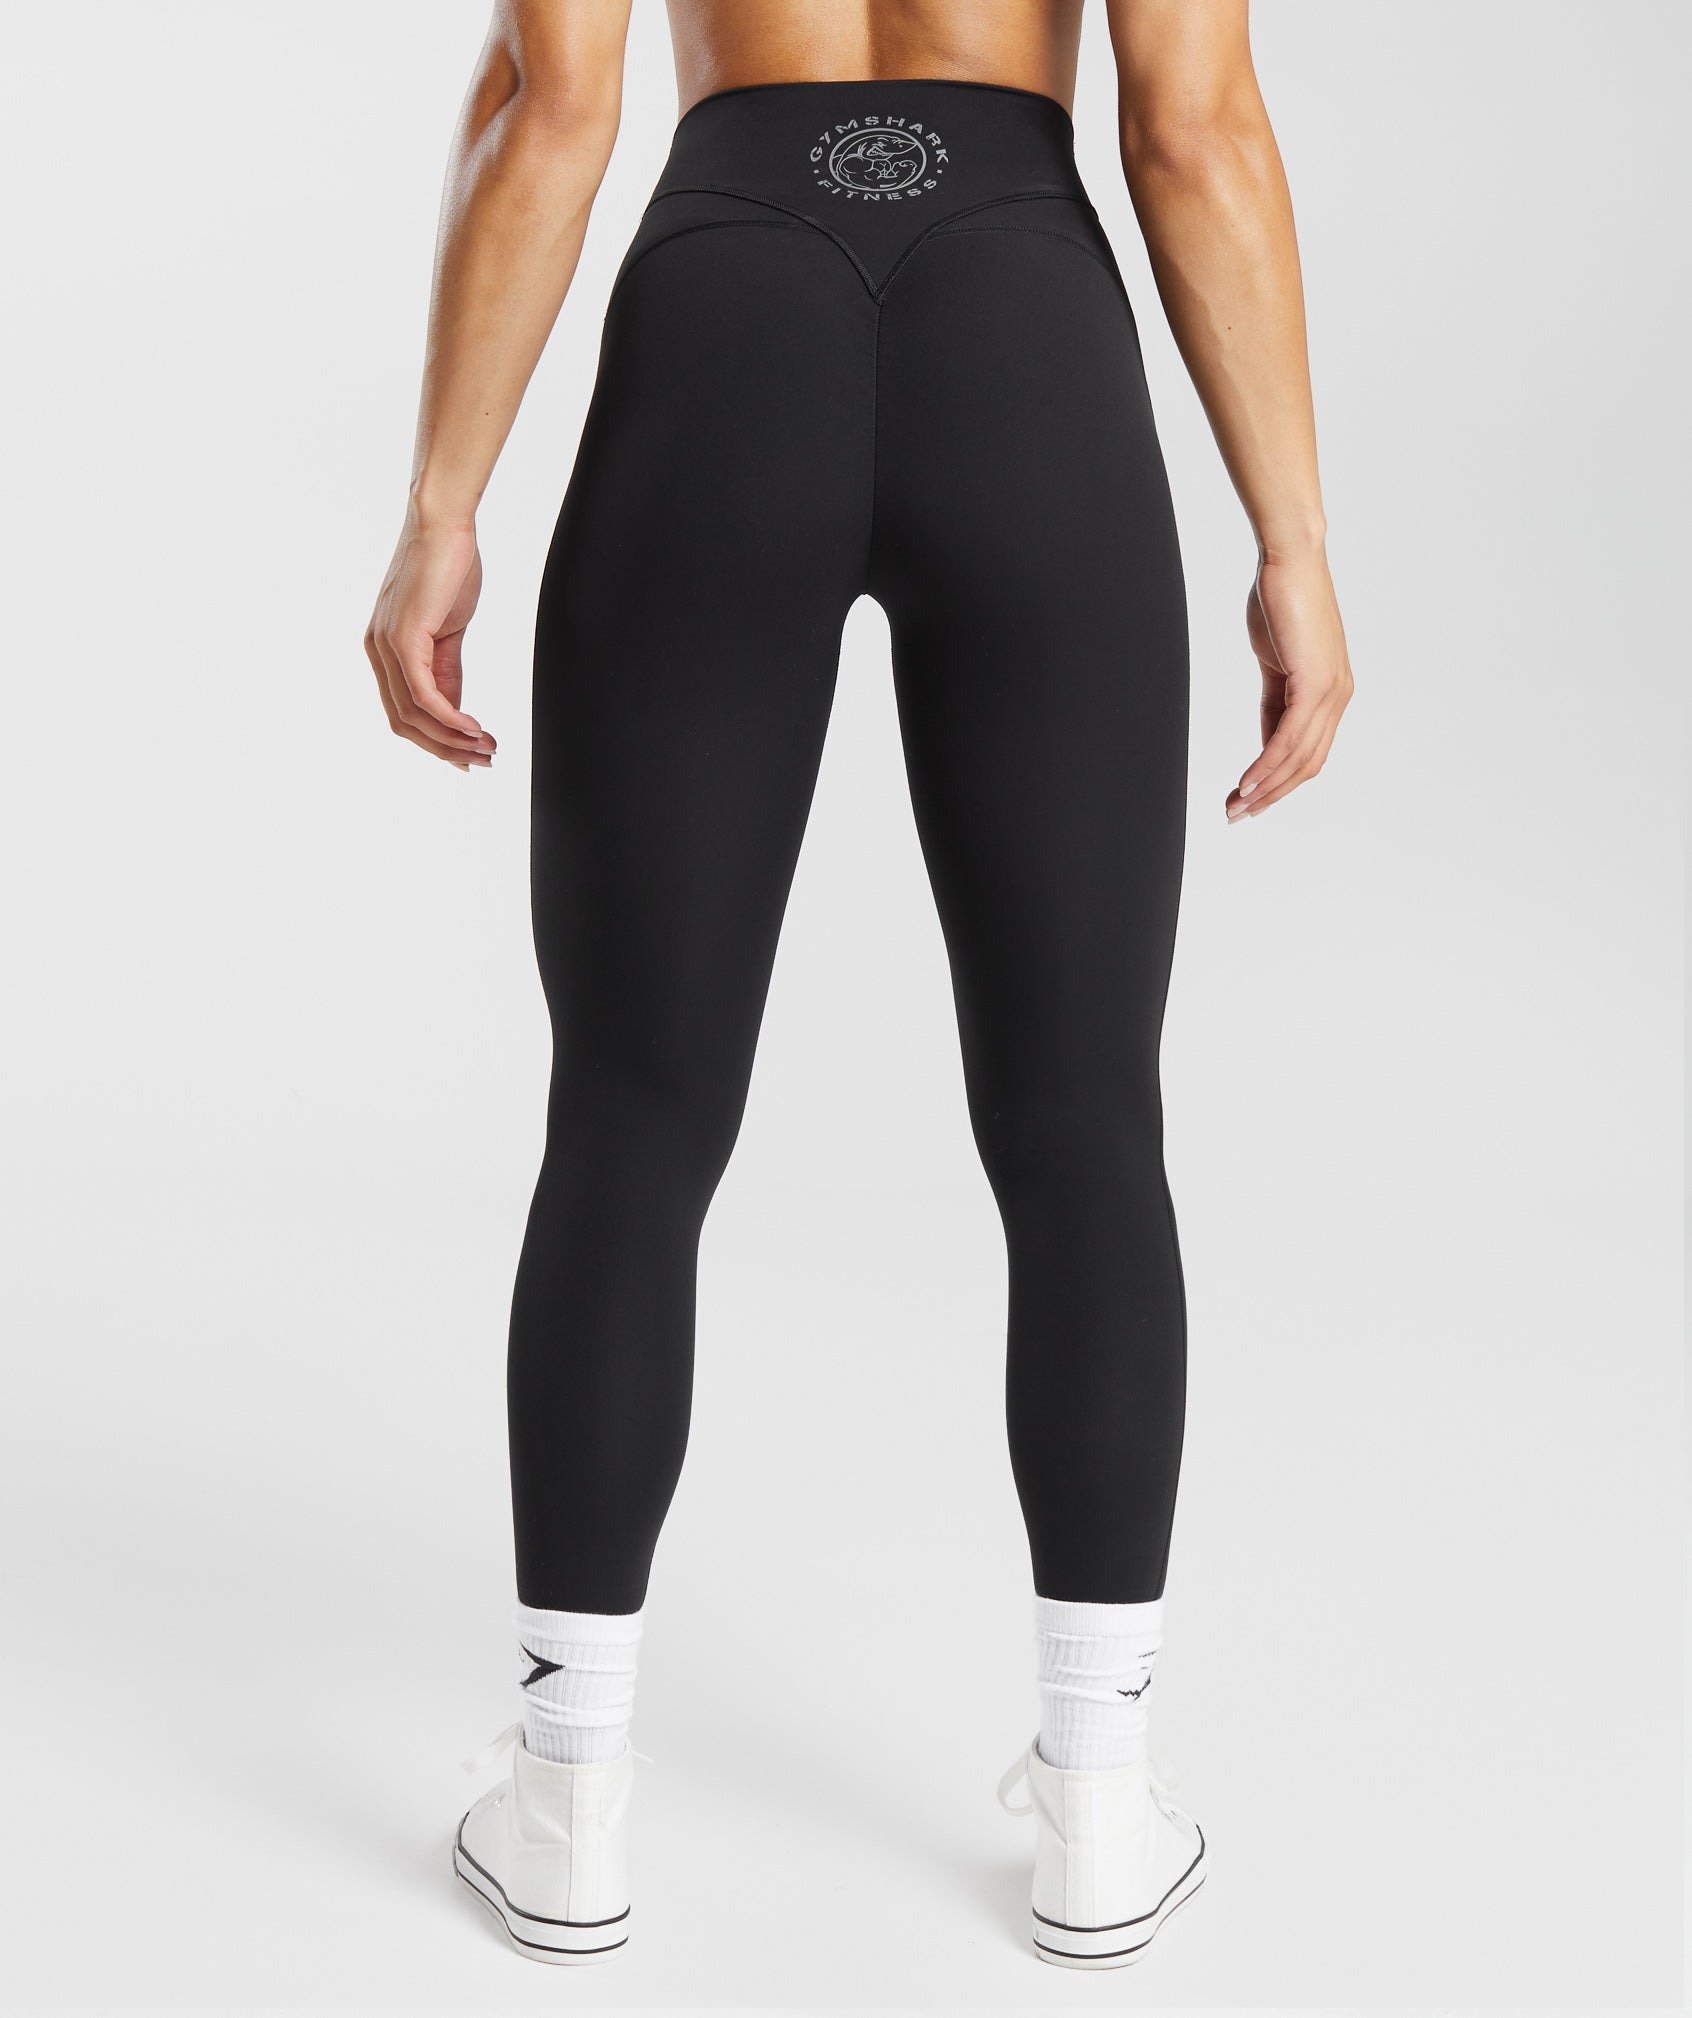 Booty Shorts And Leggings For Women Workout – Tonys Finest